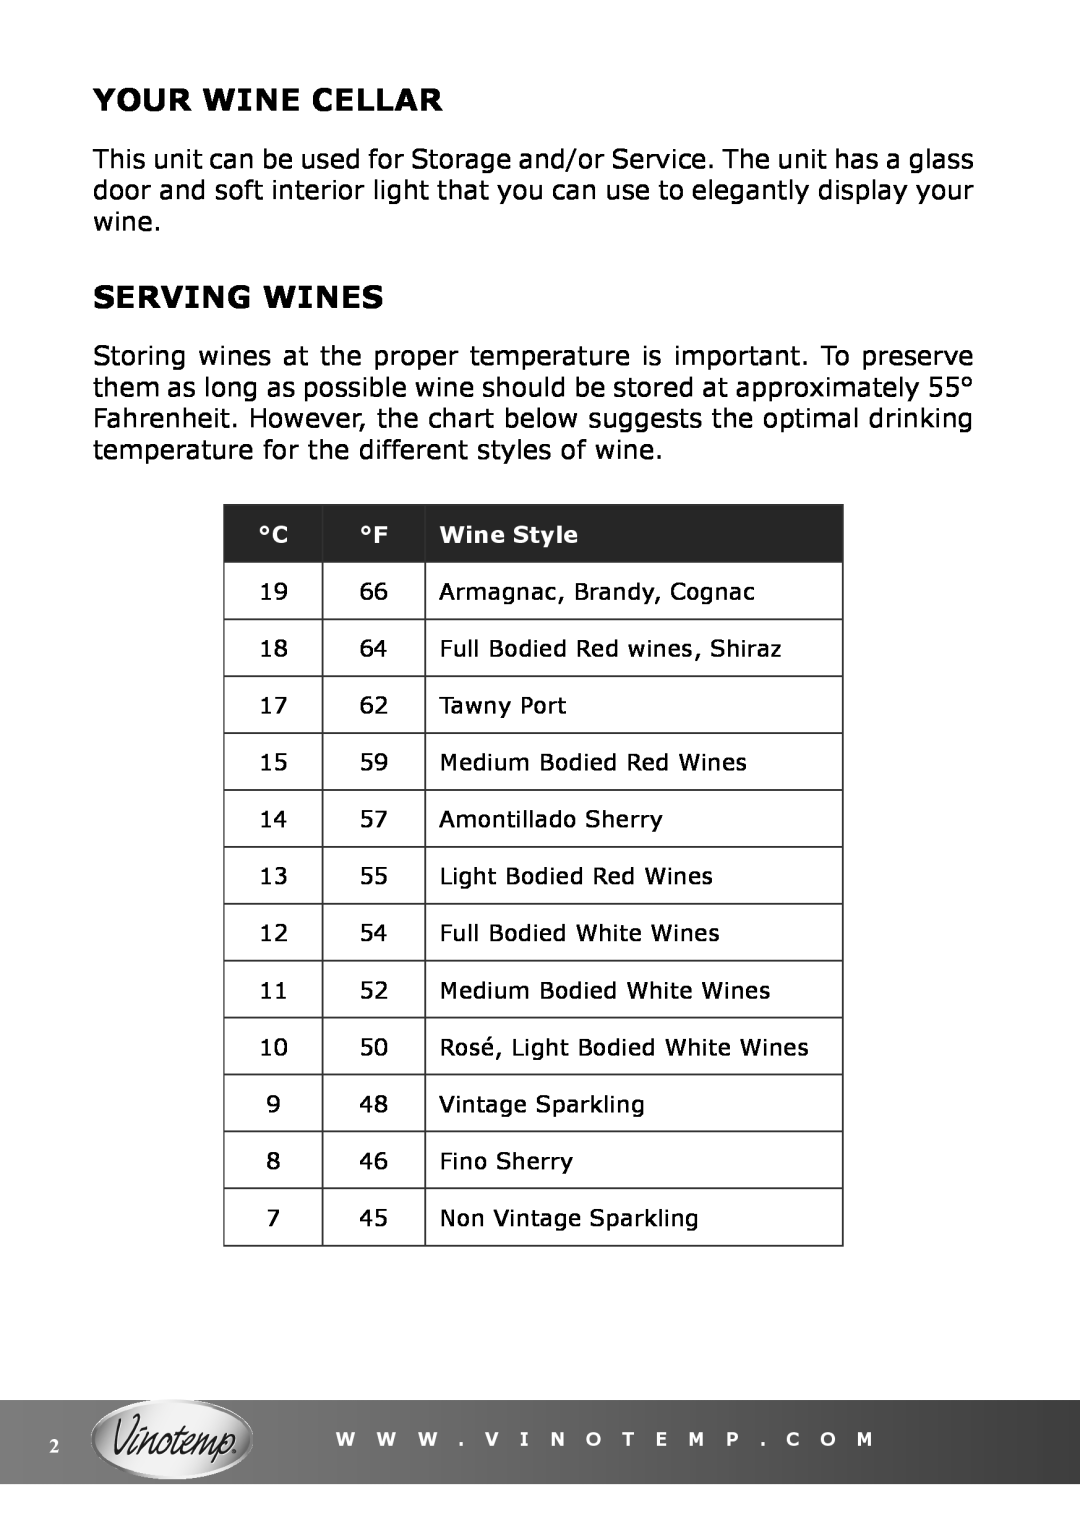 Vinotemp VT-15 TS owner manual Your Wine Cellar, Serving Wines, Wine Style 